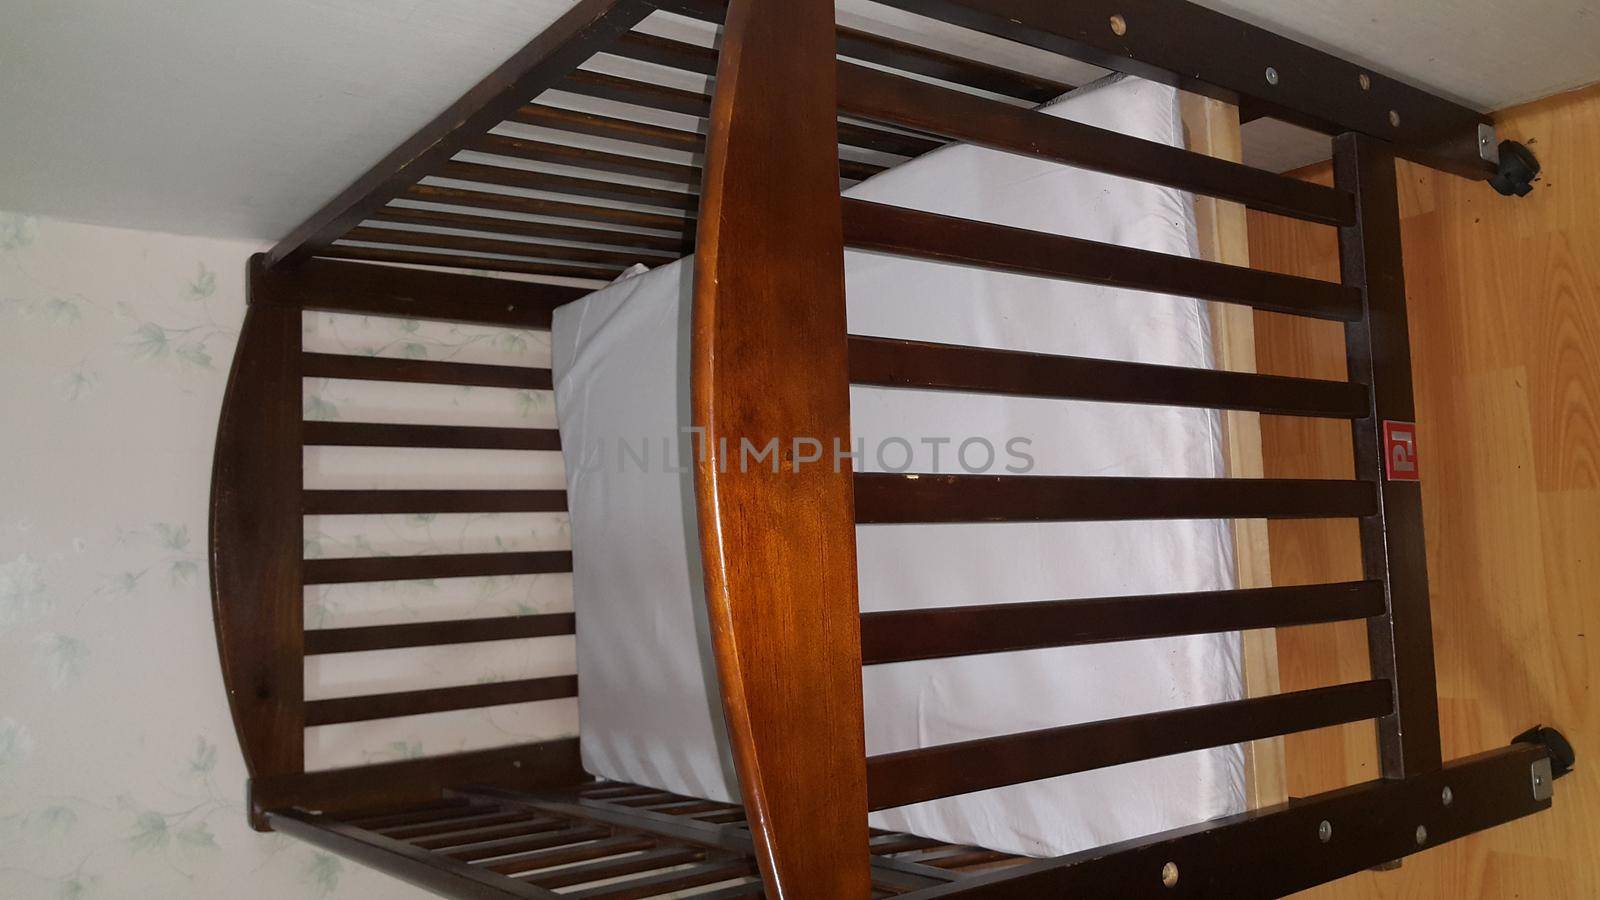 Crib by armchair at home on wooden floor